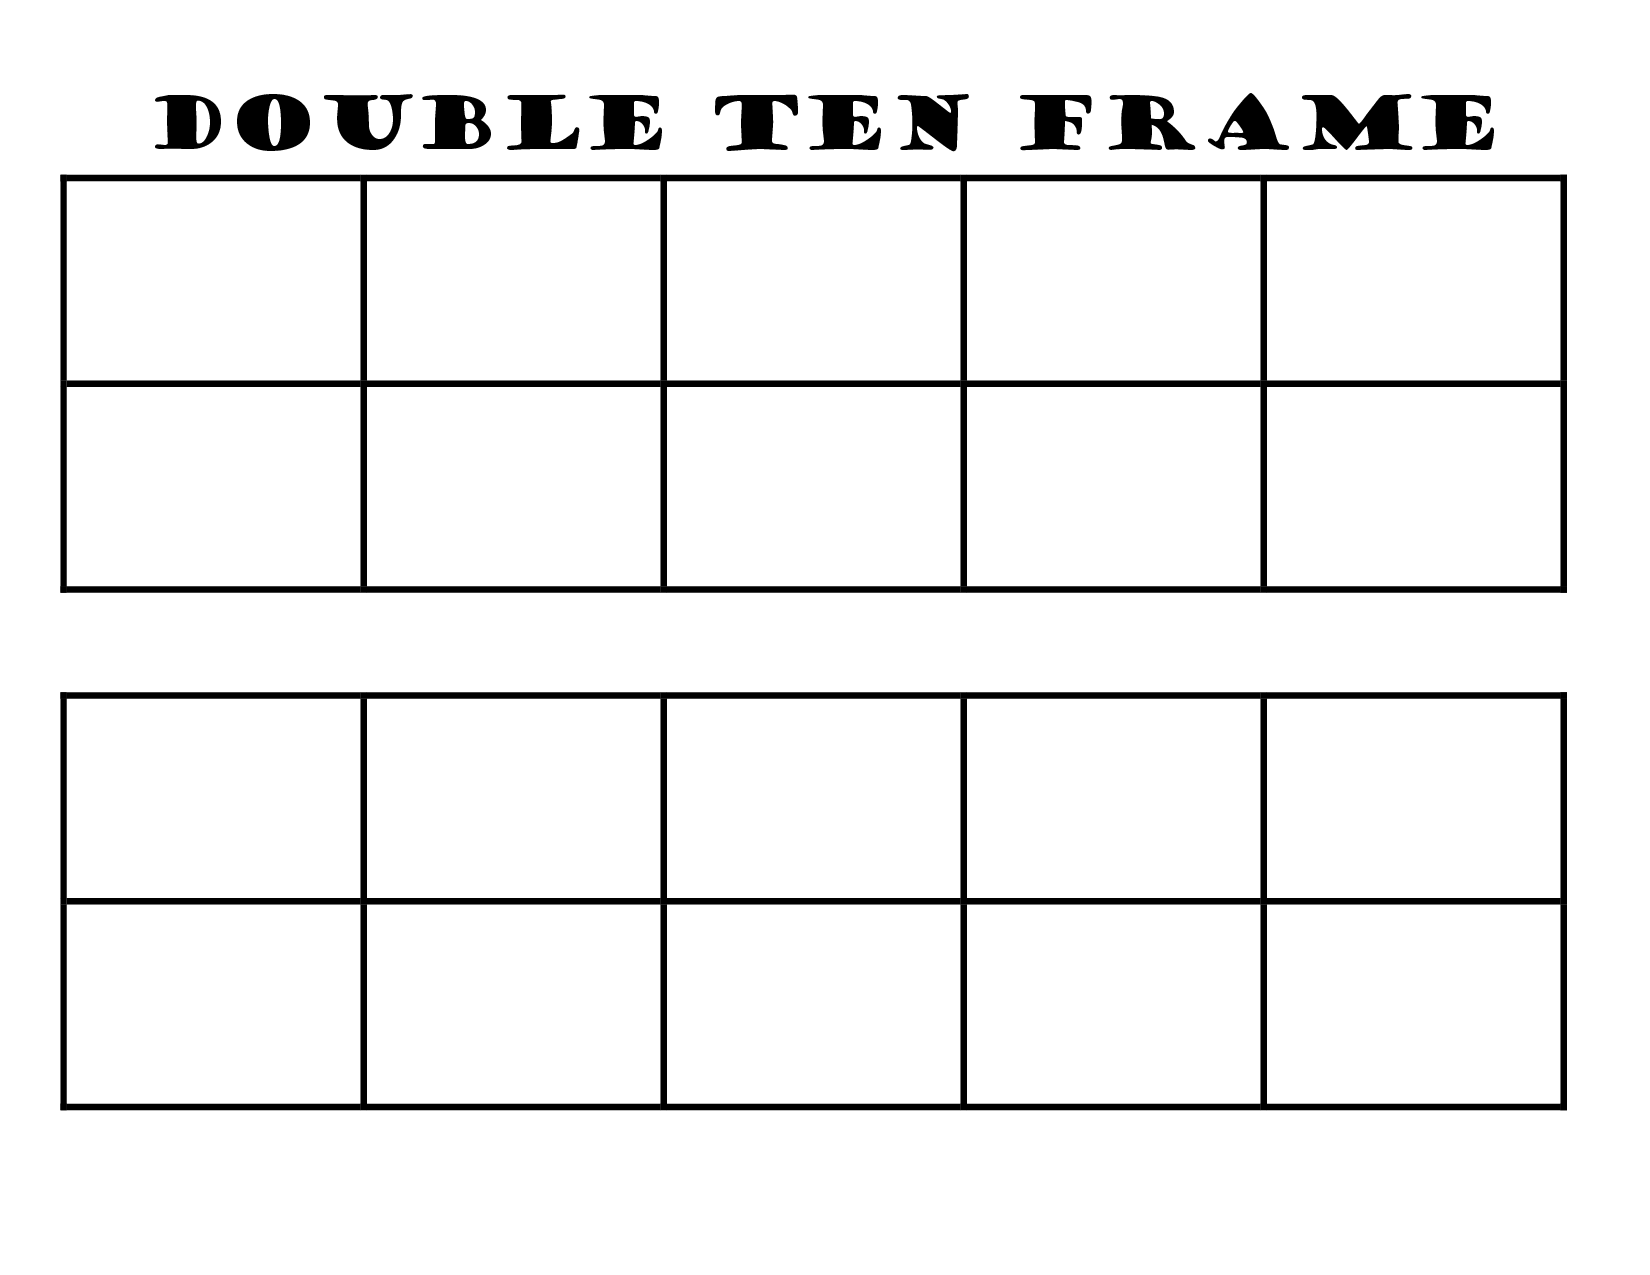 6 Best Images of 10 Frame Template Printable Blank Double Ten Frame